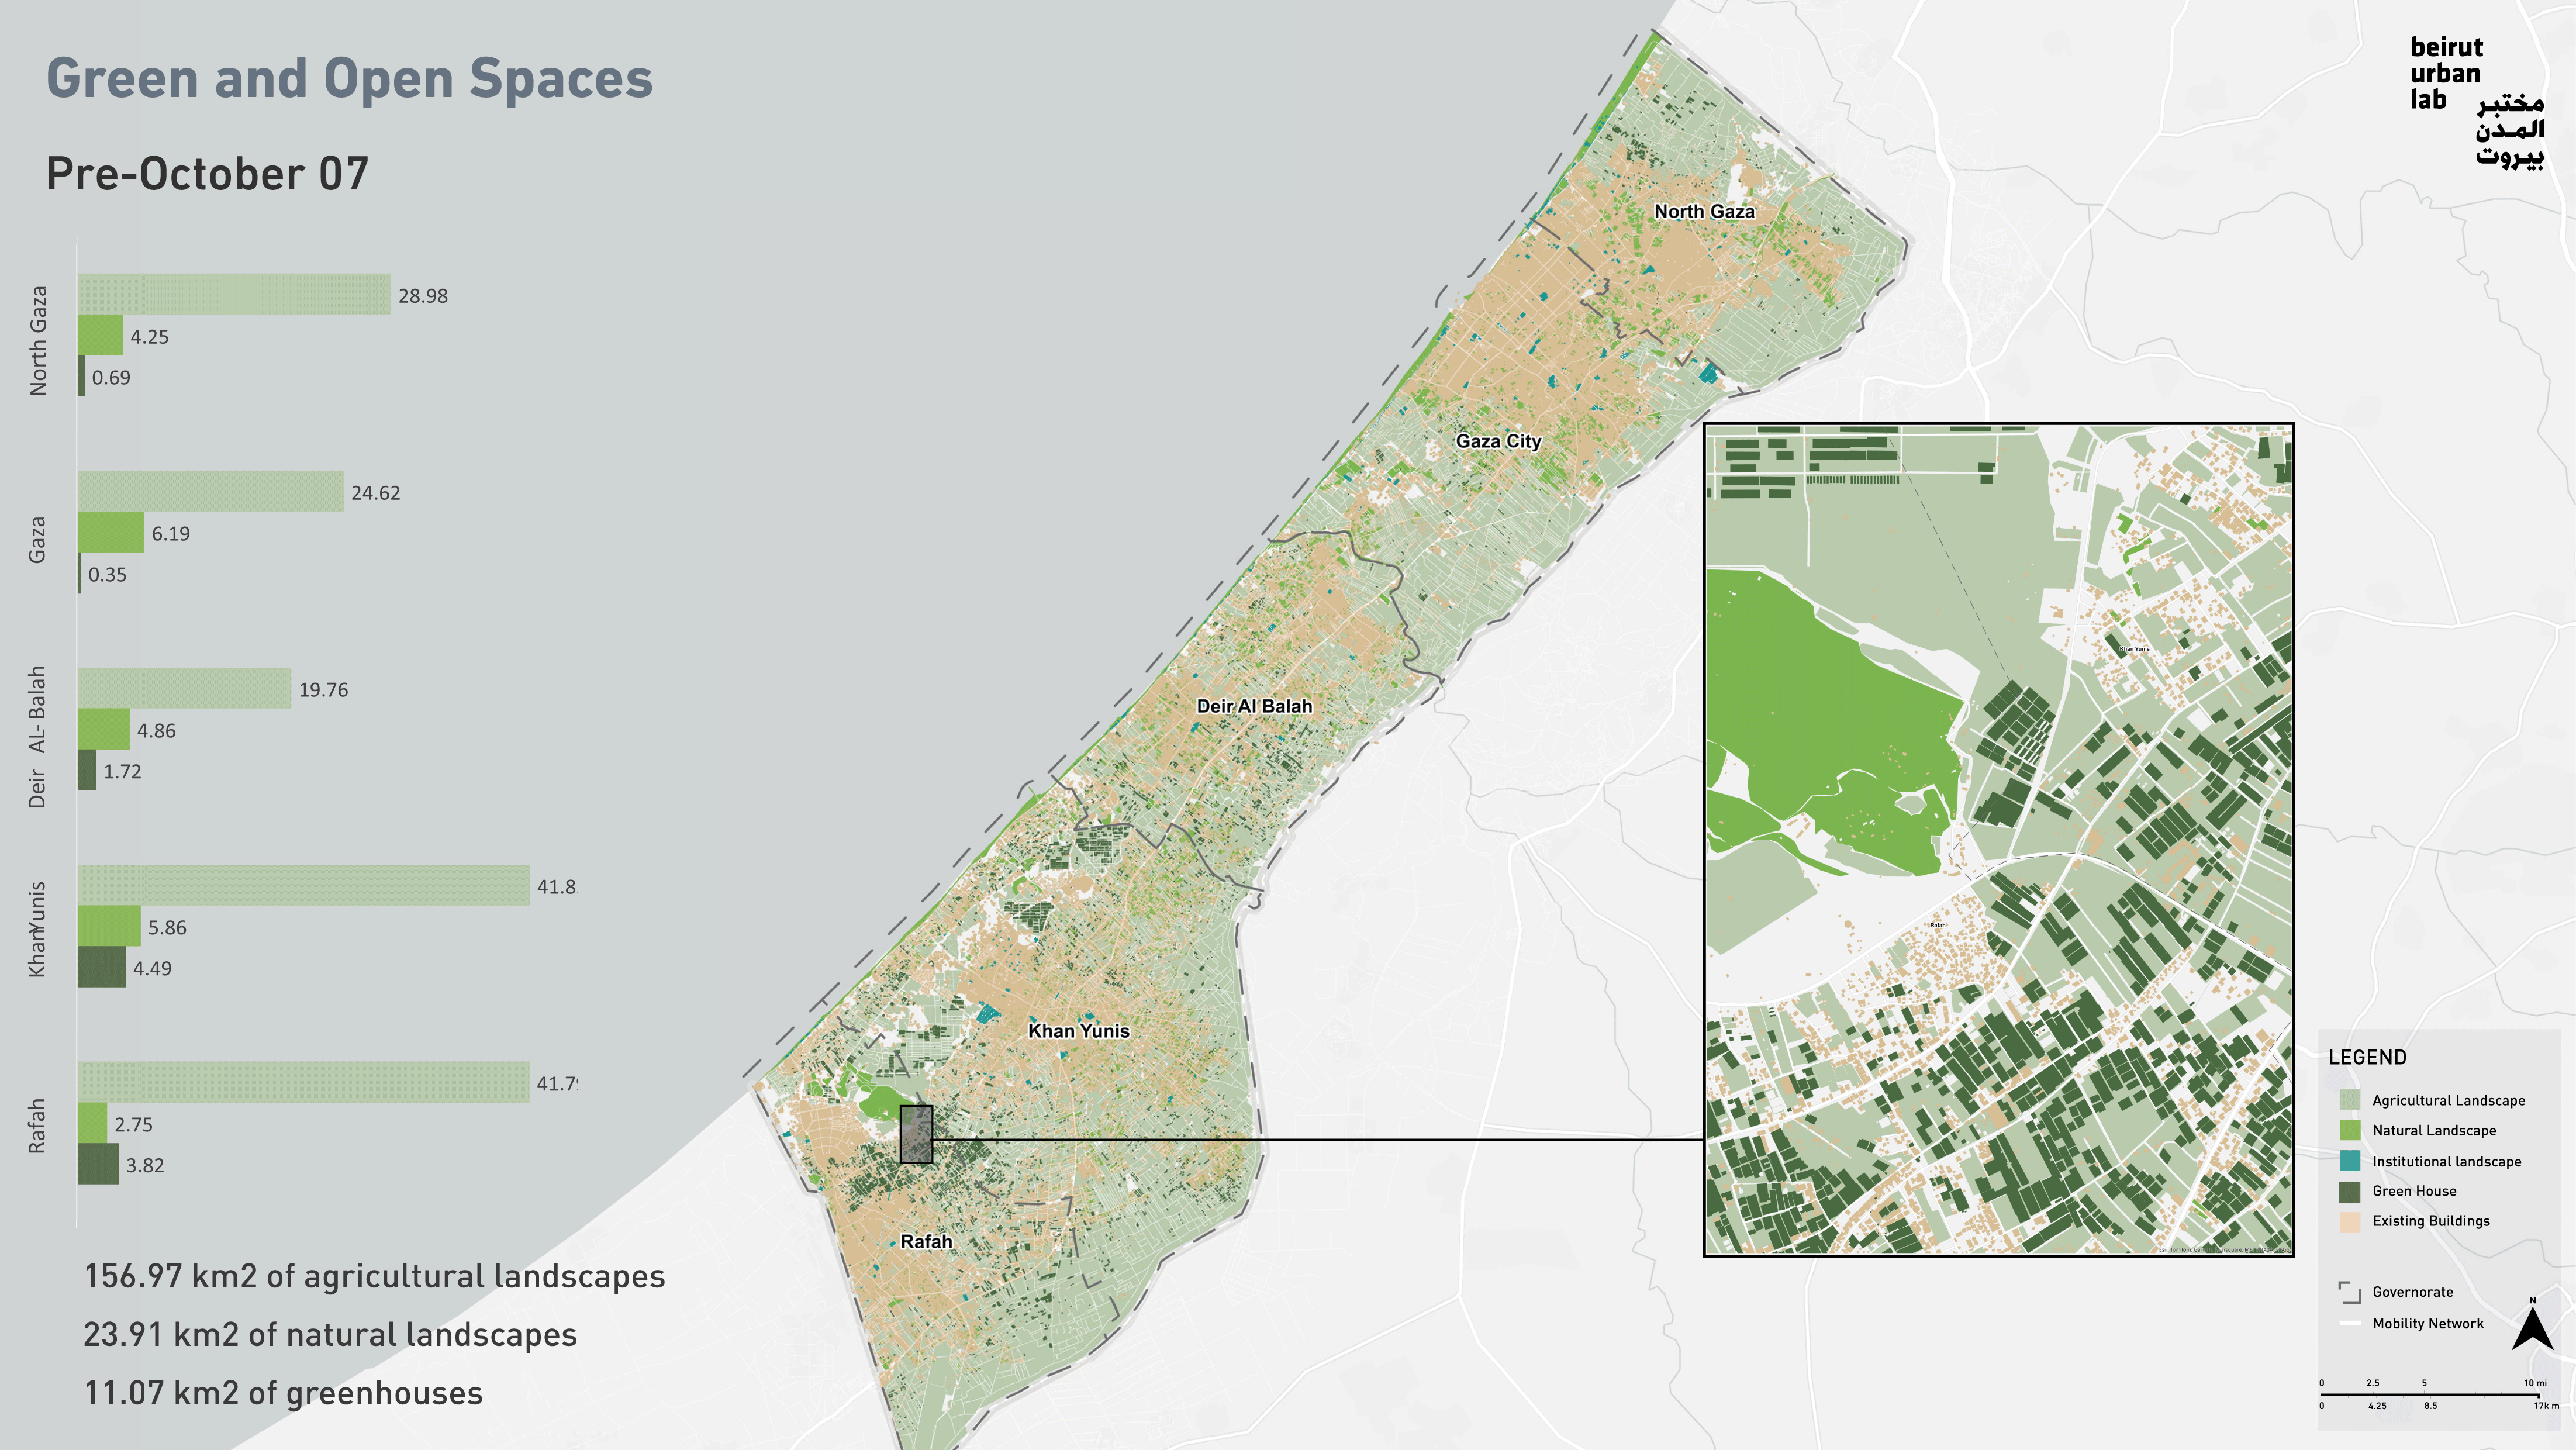 Damages to green/open spaces in Gaza. Source: Beirut Urban Lab based on data from UNOSAT